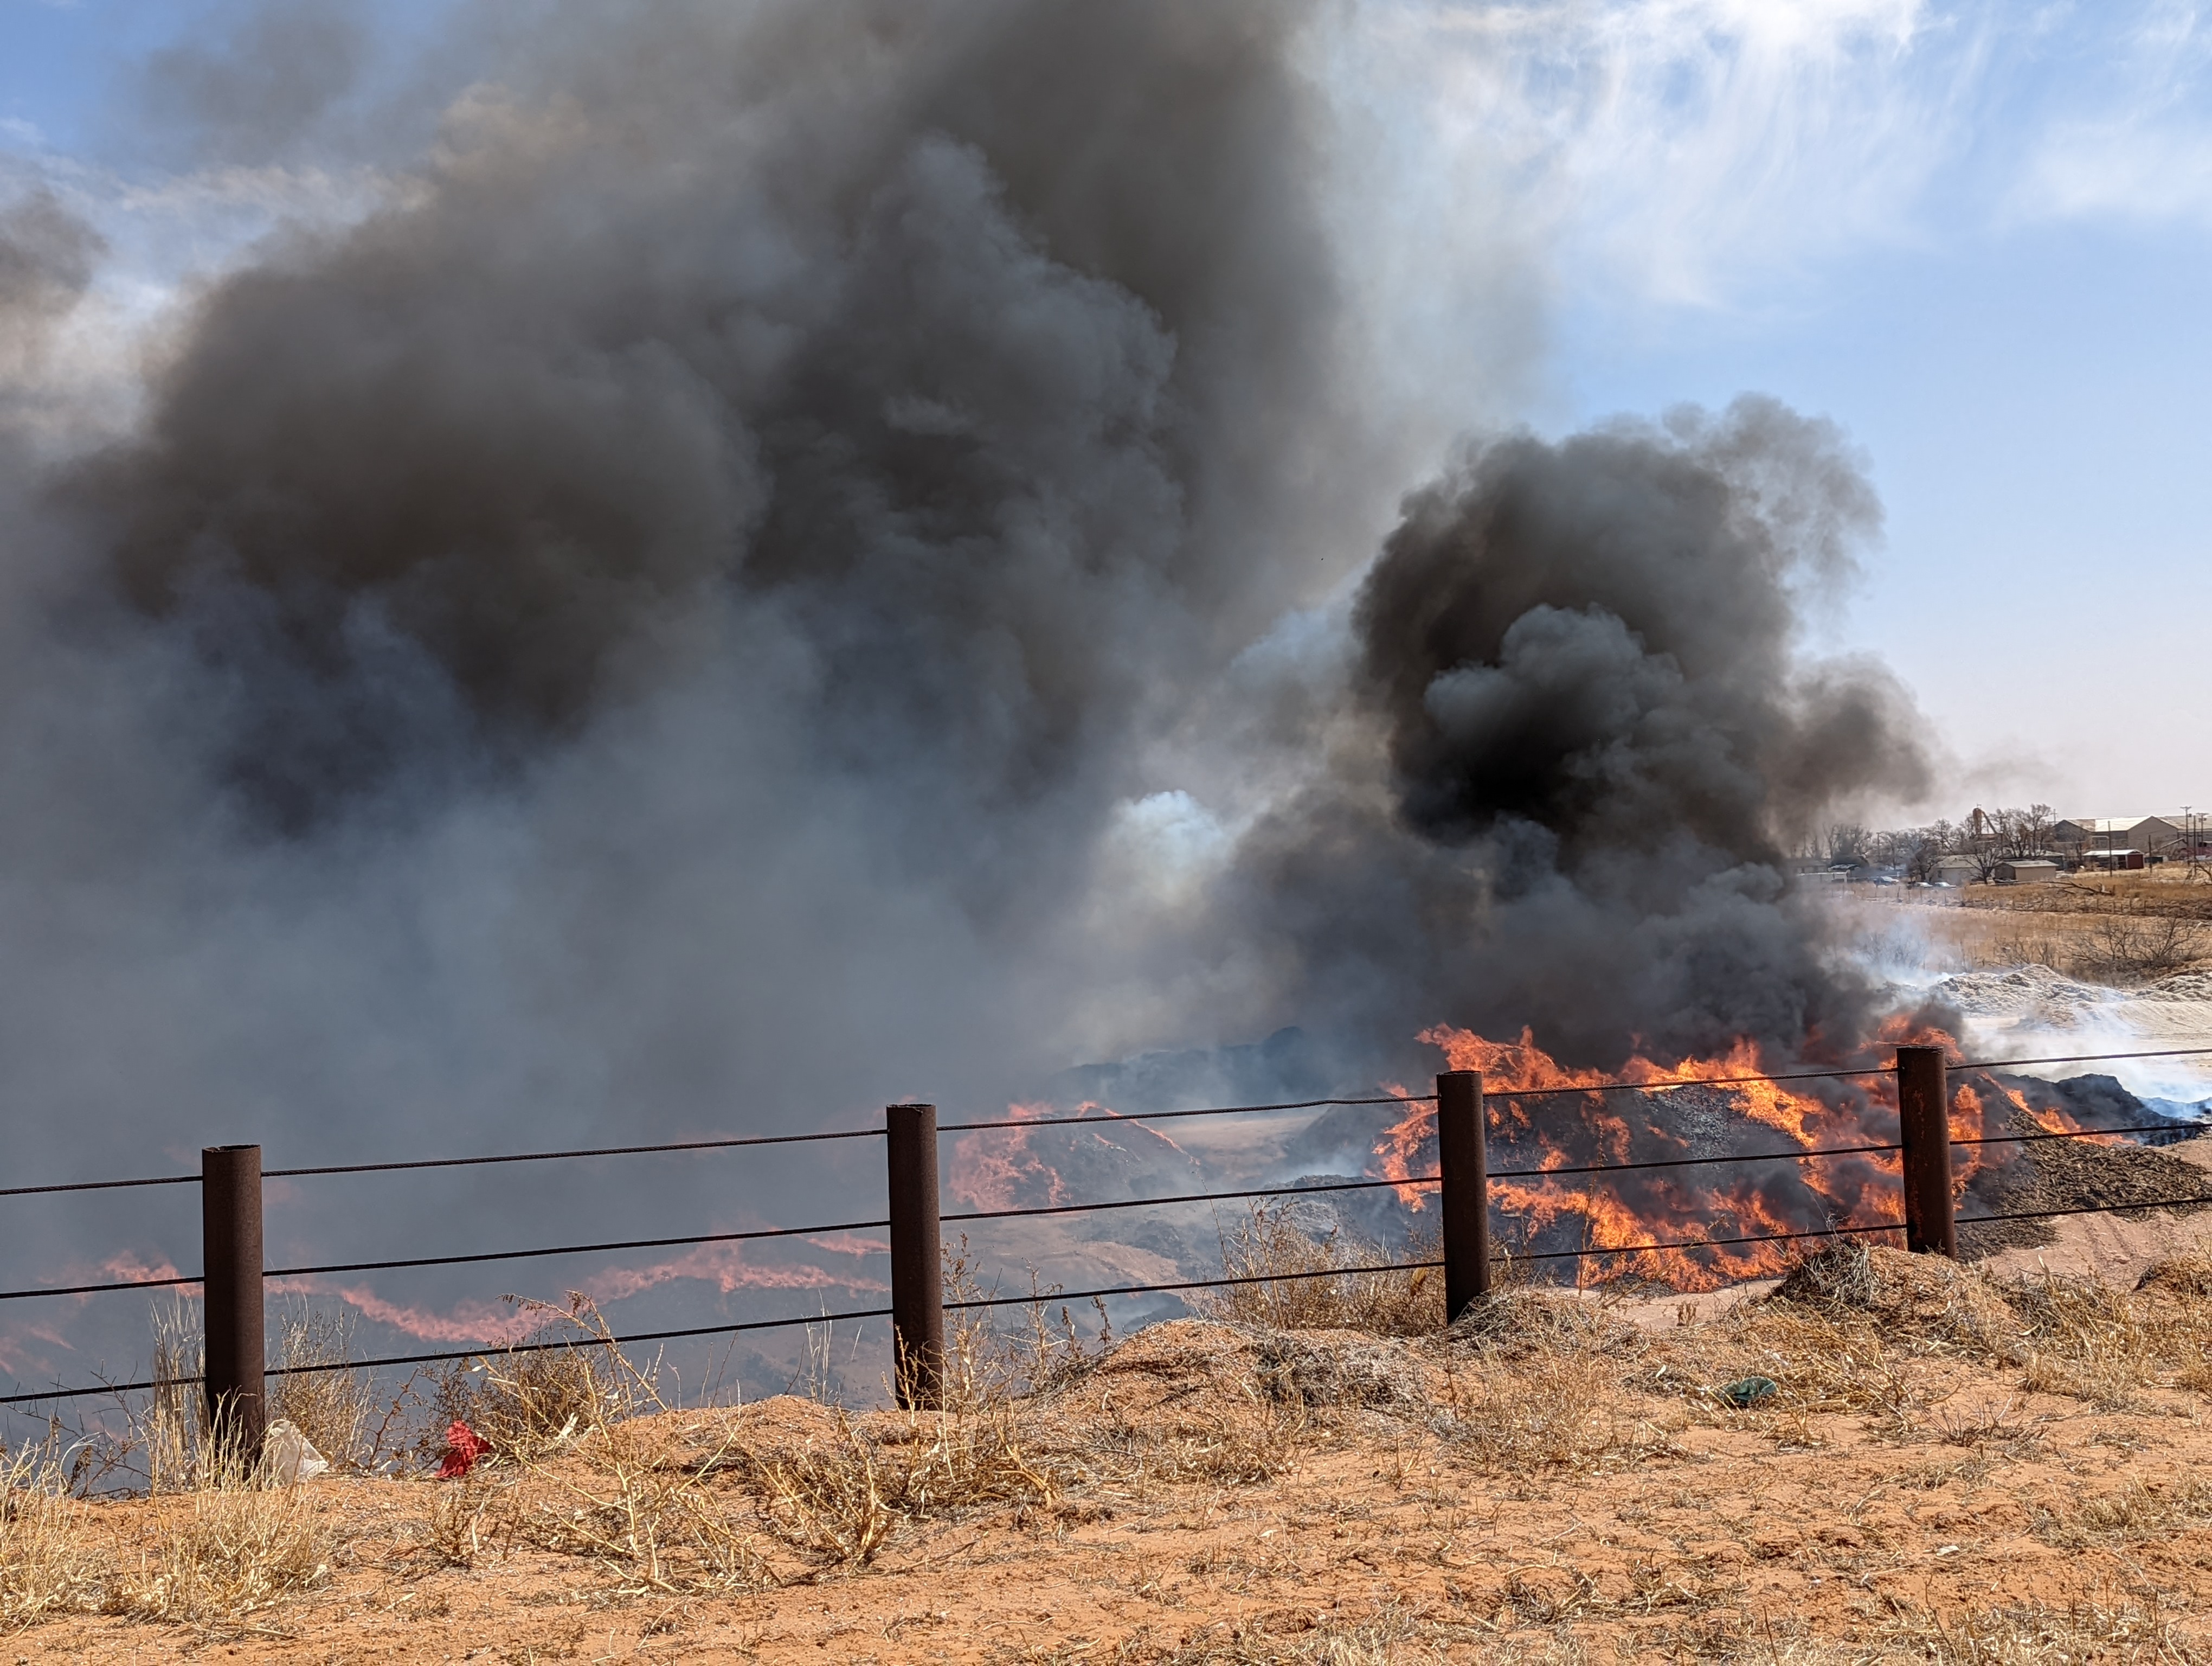 Fire on the west side of Brownfield Thursday afternoon (17 March 2022).